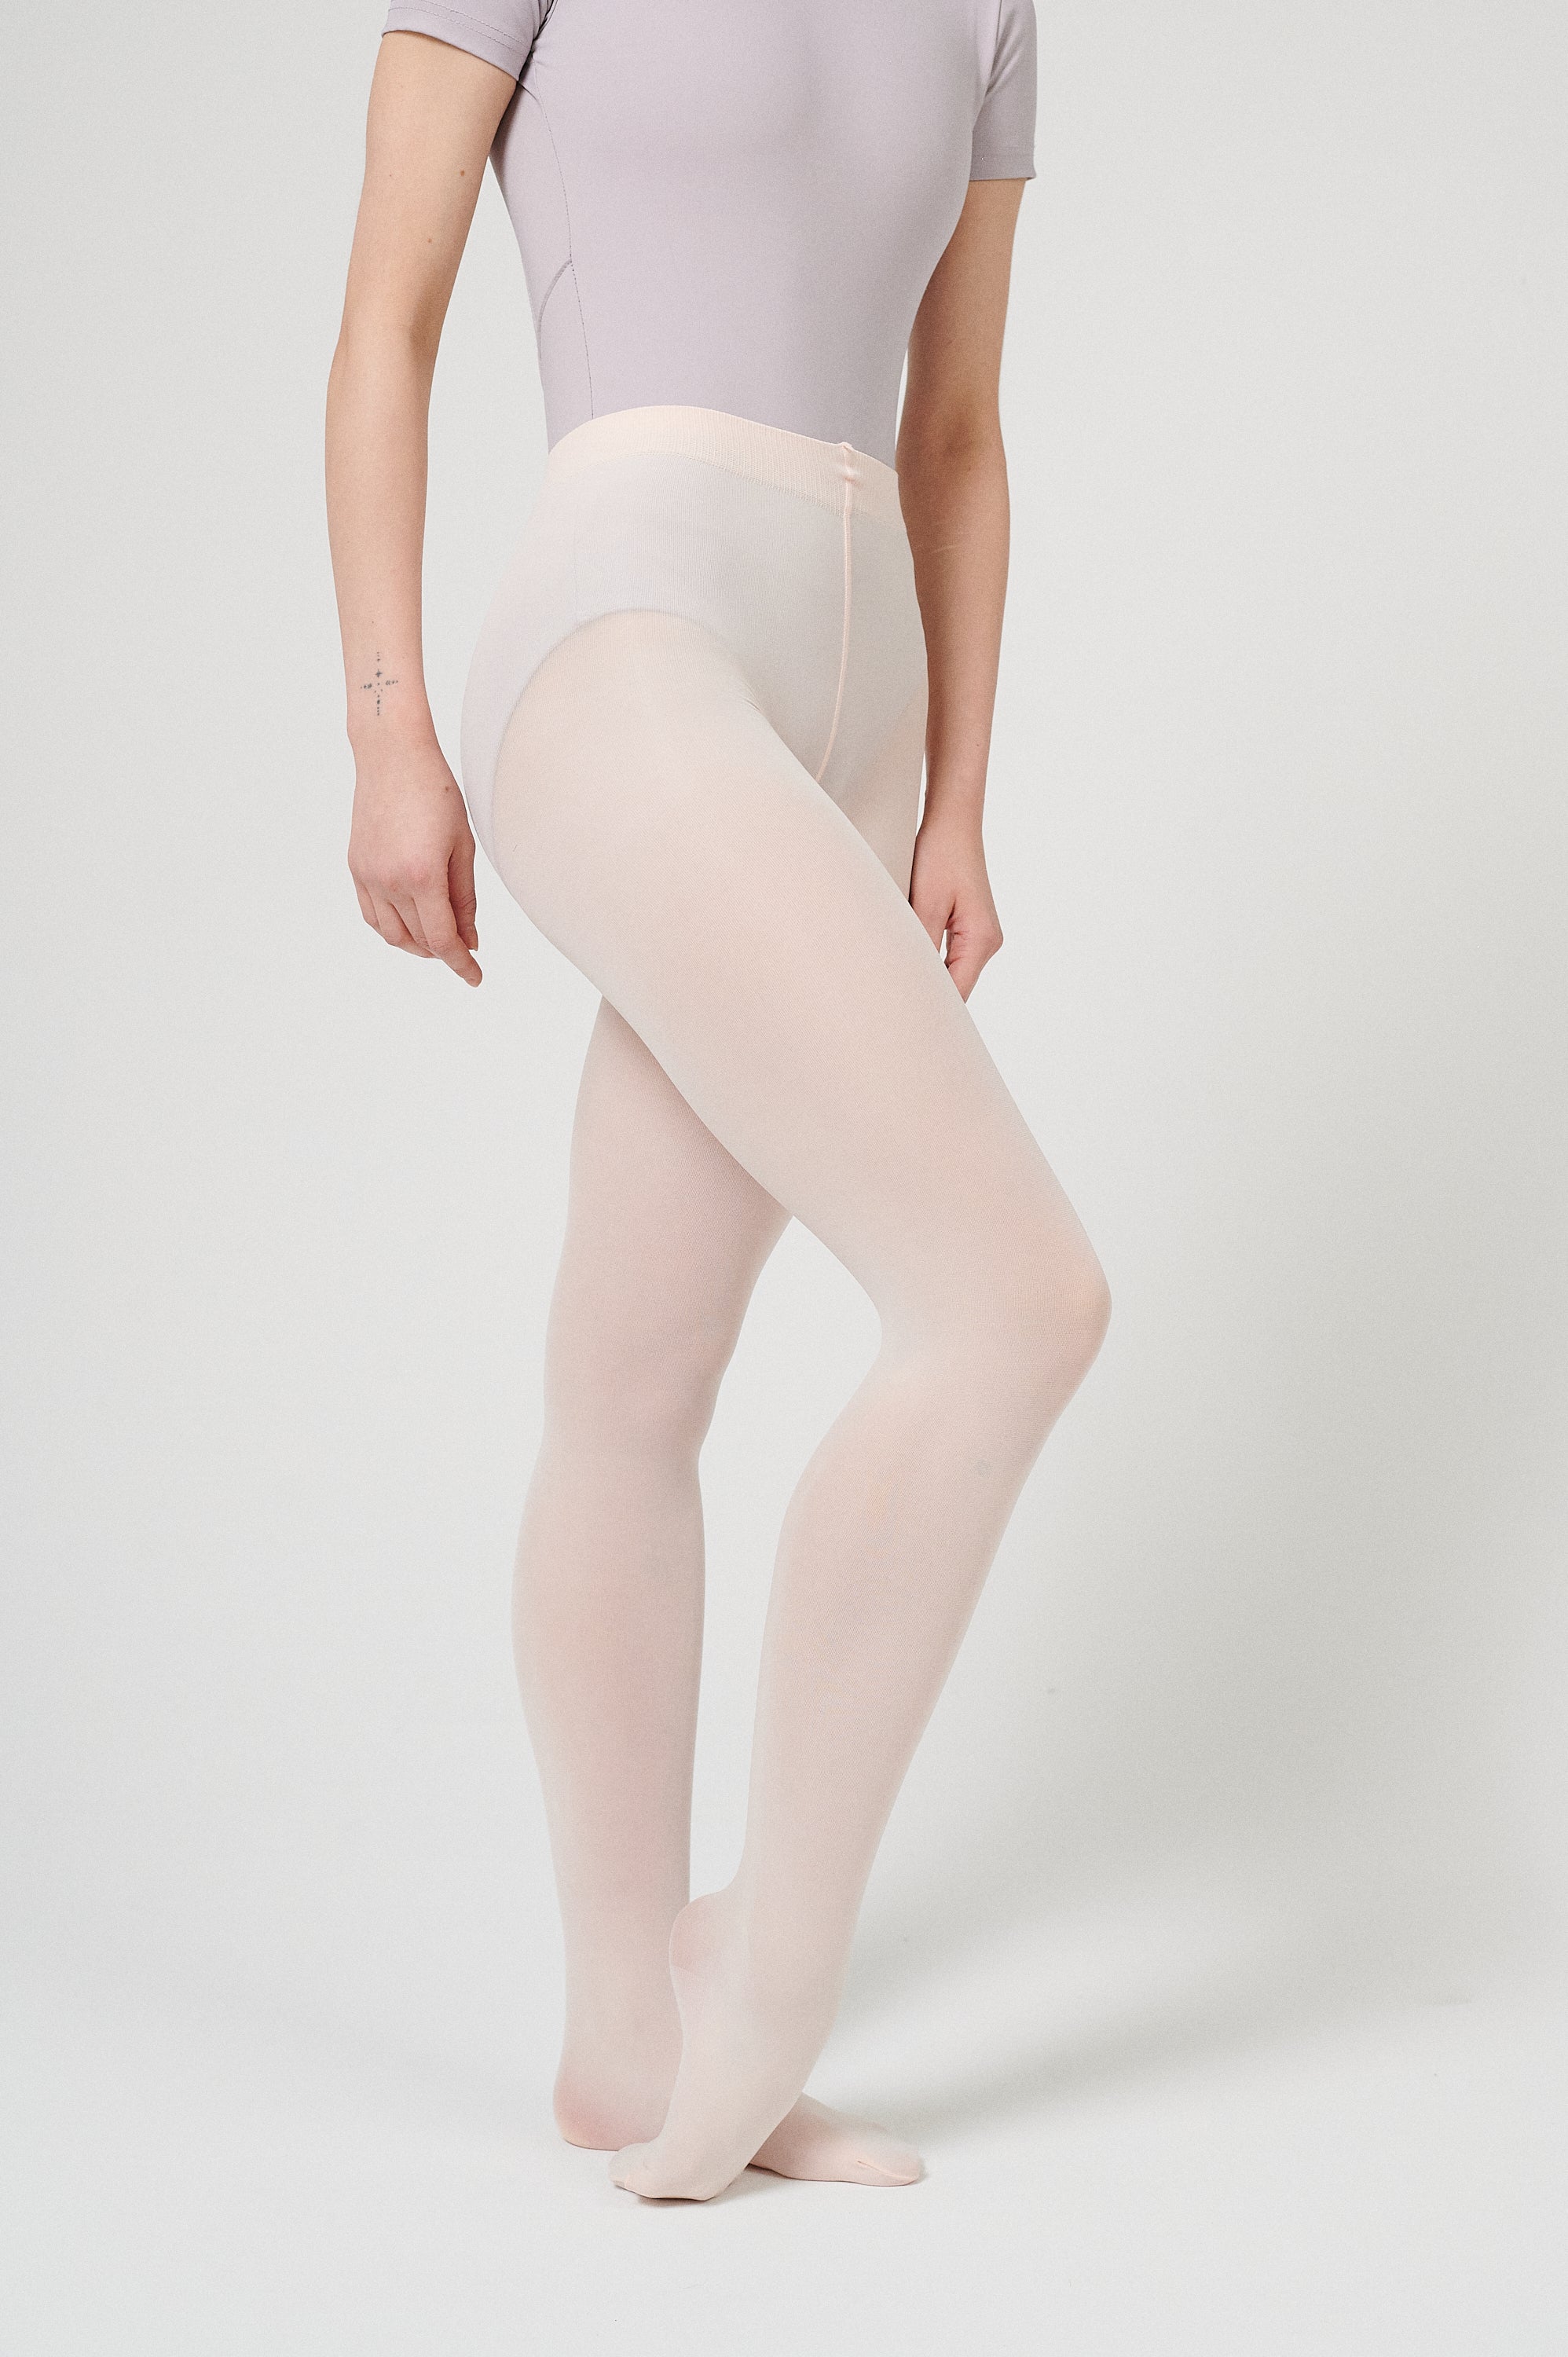 Future Giselle Collection 24 | Convertible Ballet Tights